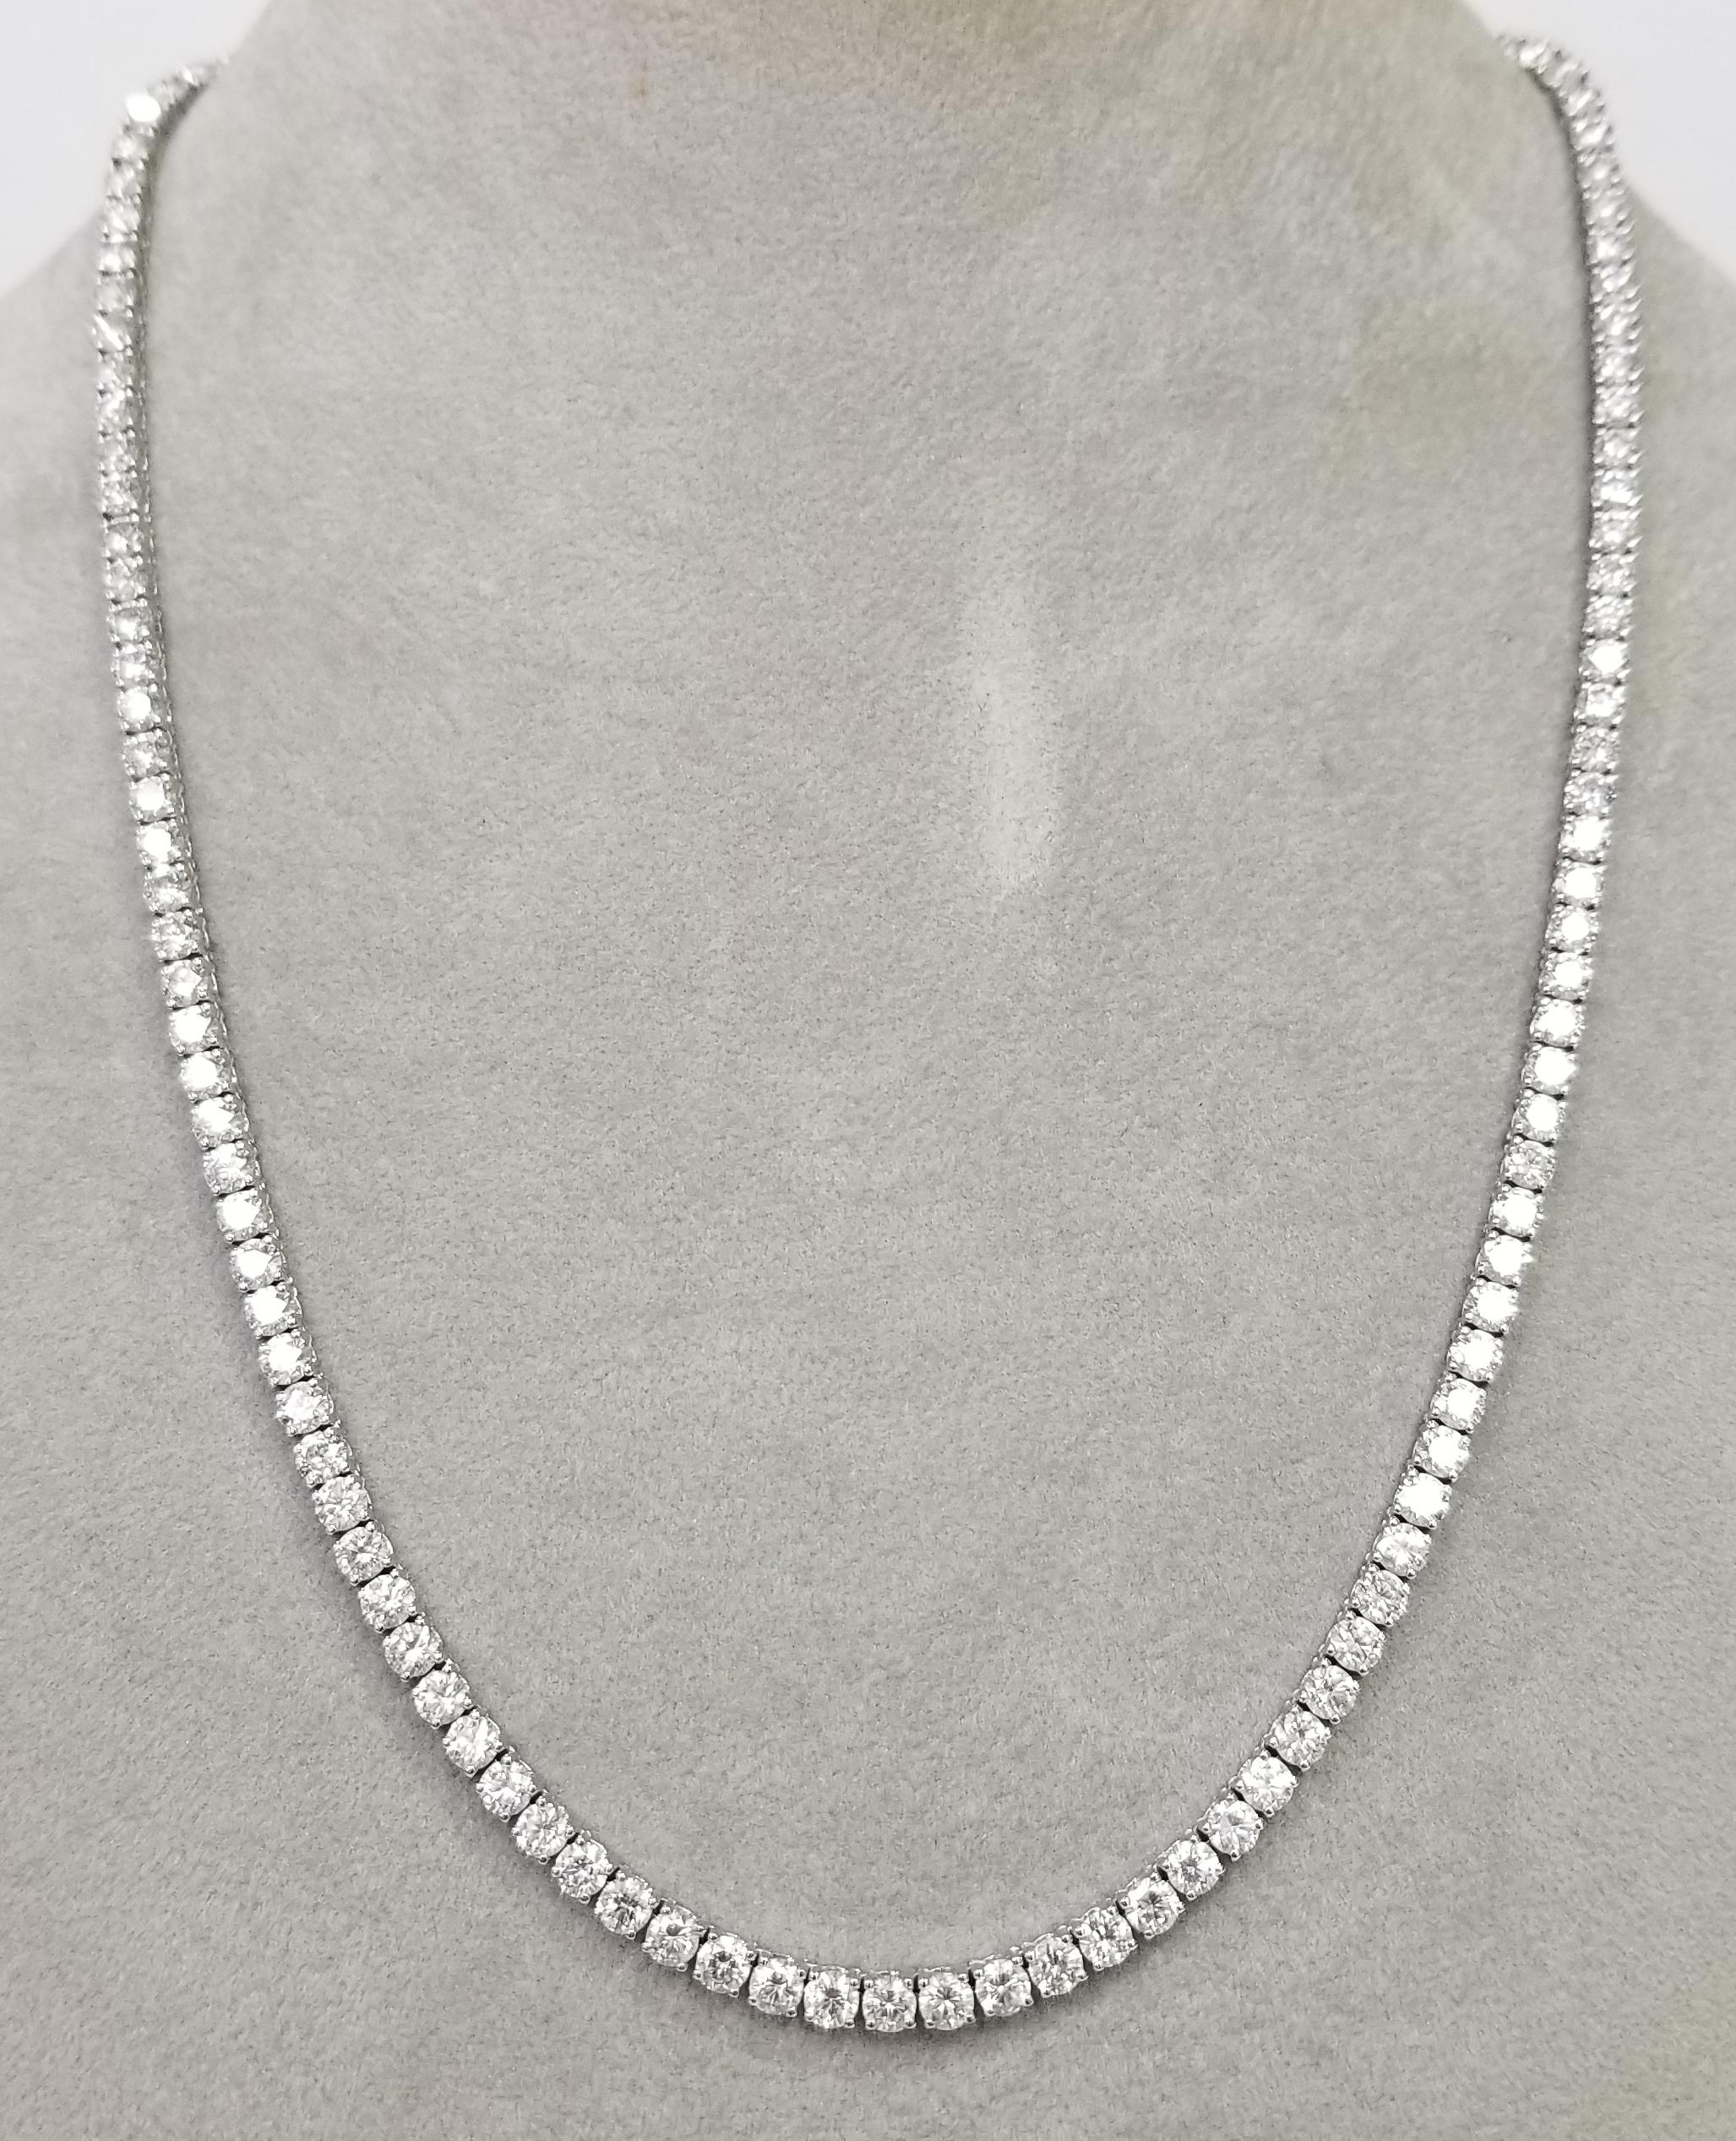 About
18k white gold 4 prong diamond necklace, containing 
 Specifications:
    main stone: ROUND CUT DIAMONDS
    diamonds: 136 PIECES
    carat total weight: 16.34cts.
    color: F-G
    clarity: VS1-2
    brand: custom
    metal:  18K GOLD
   